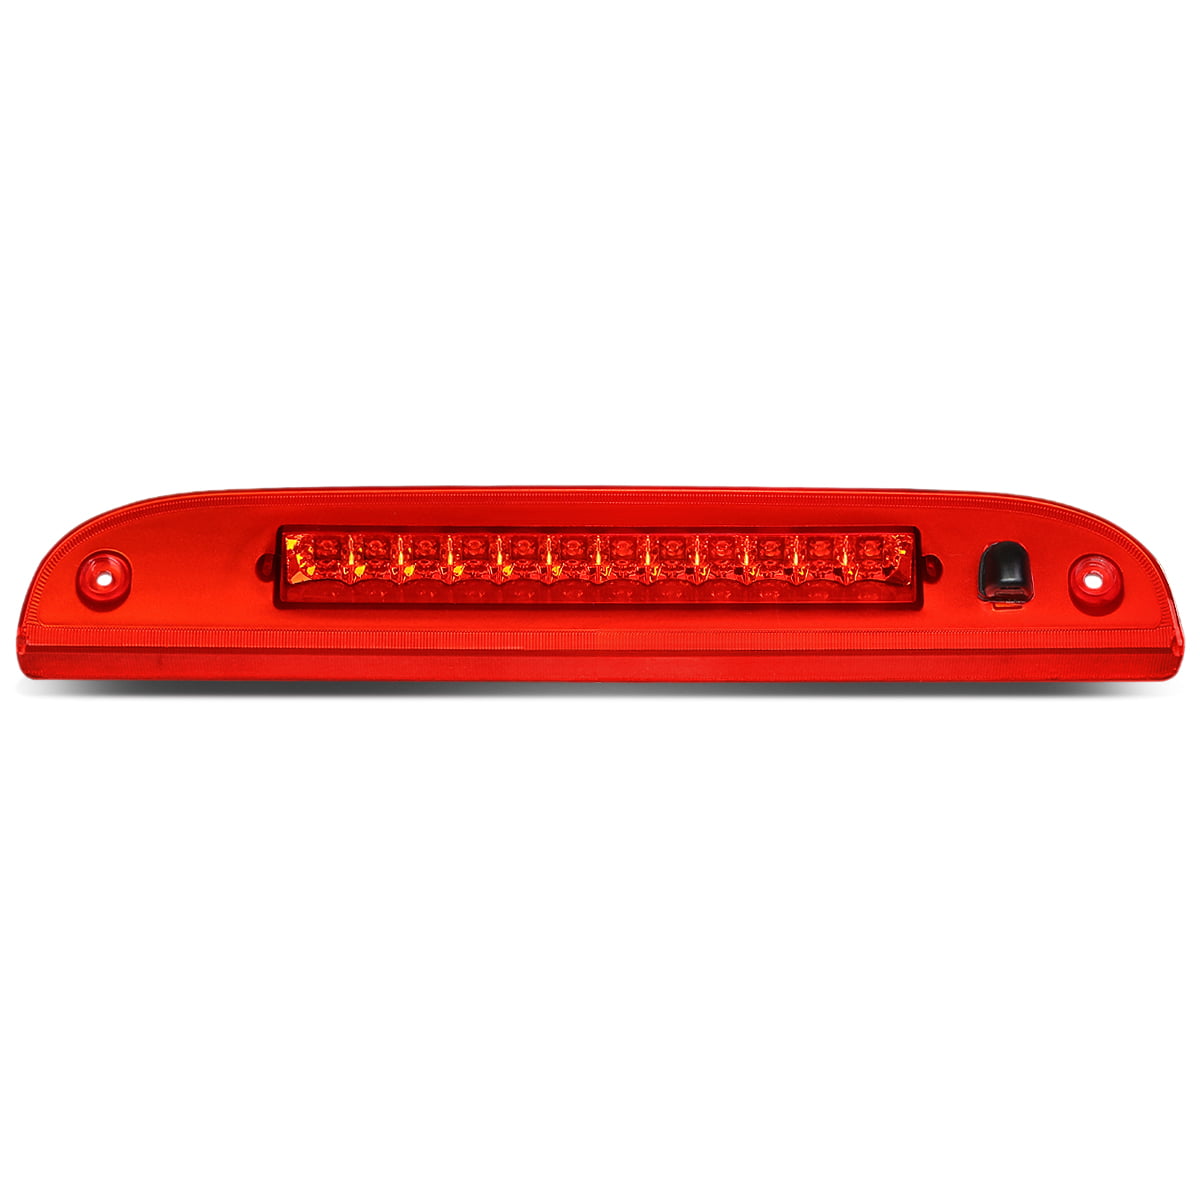 Red 3rd Third Brake Light High Mount Stop Light Lamp Replacement for 2002-2010 Ford Explorer 2008-2011 Mercury Mariner Mercury Mountaineer Ford Escape 